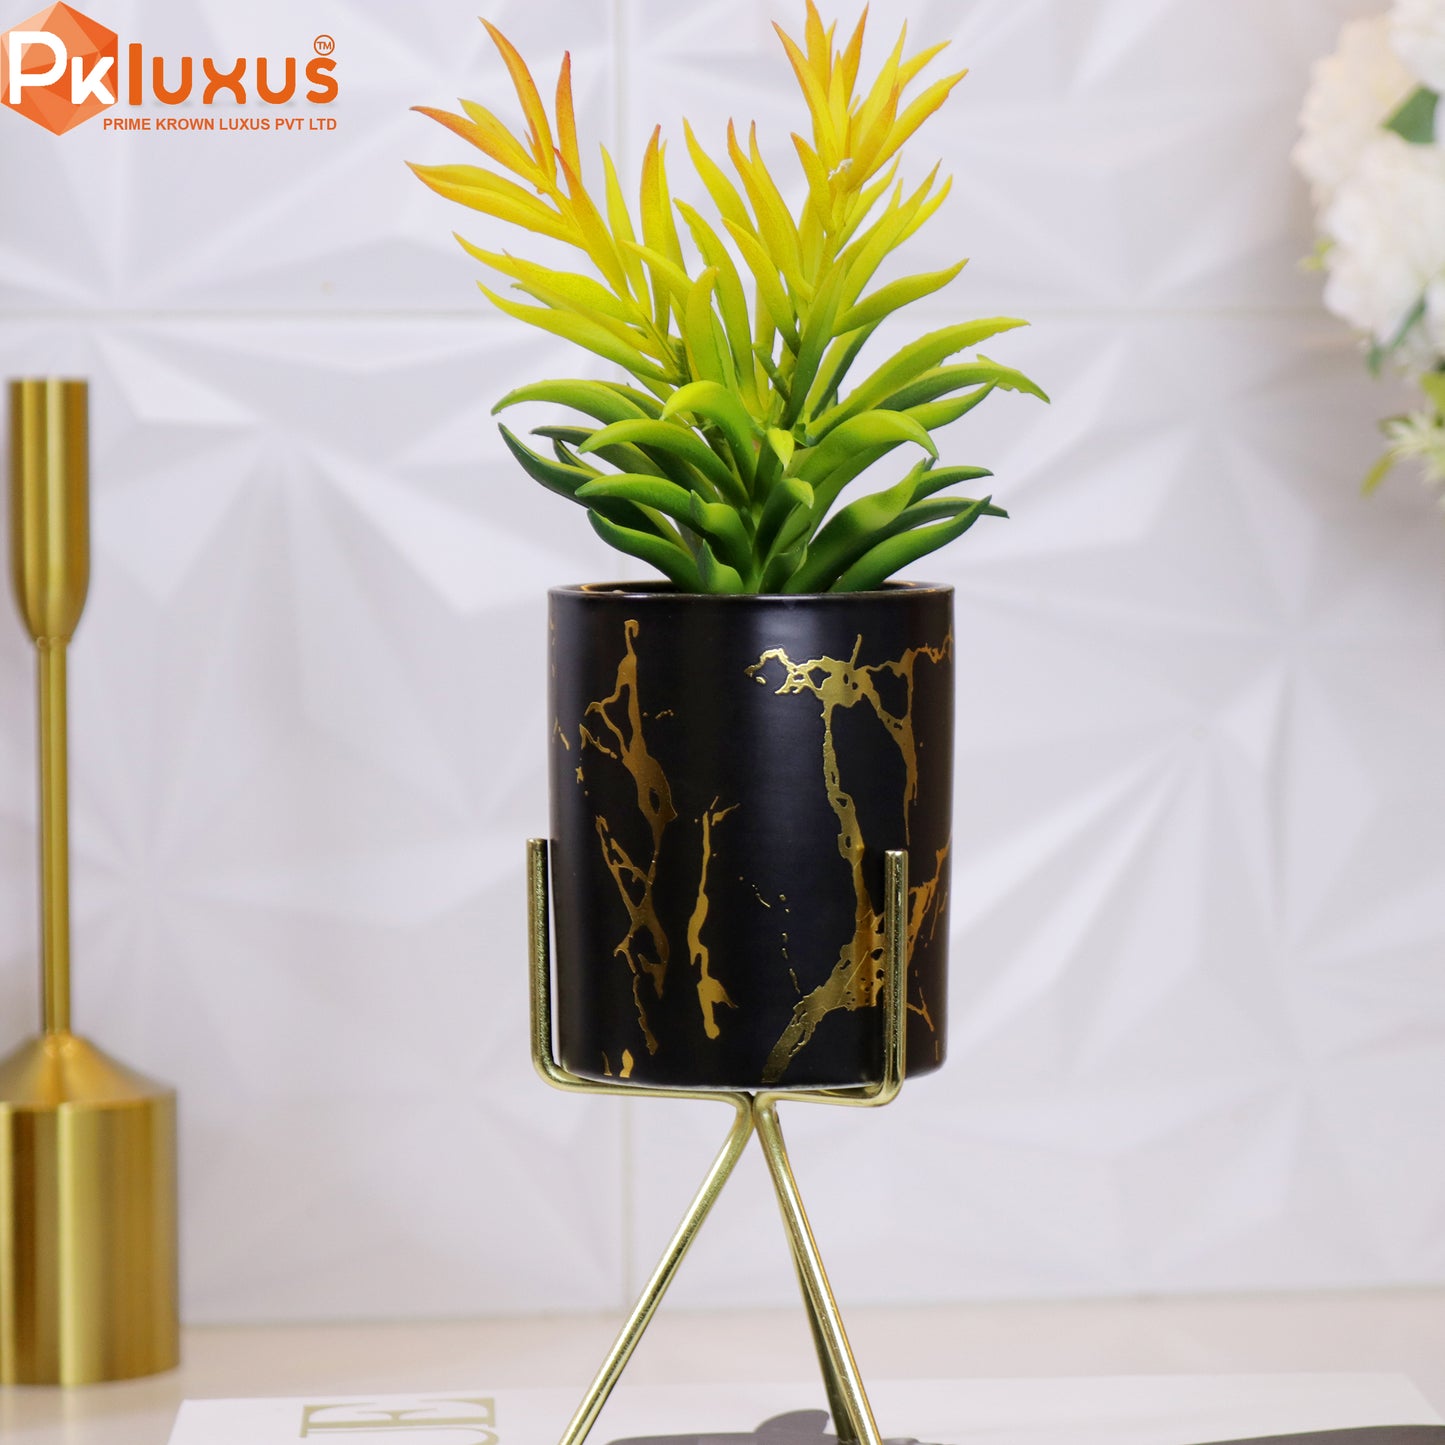 12-inch Black & Gold Planter, Pot and Stand By PK LUXUS™ - PK LUXUS